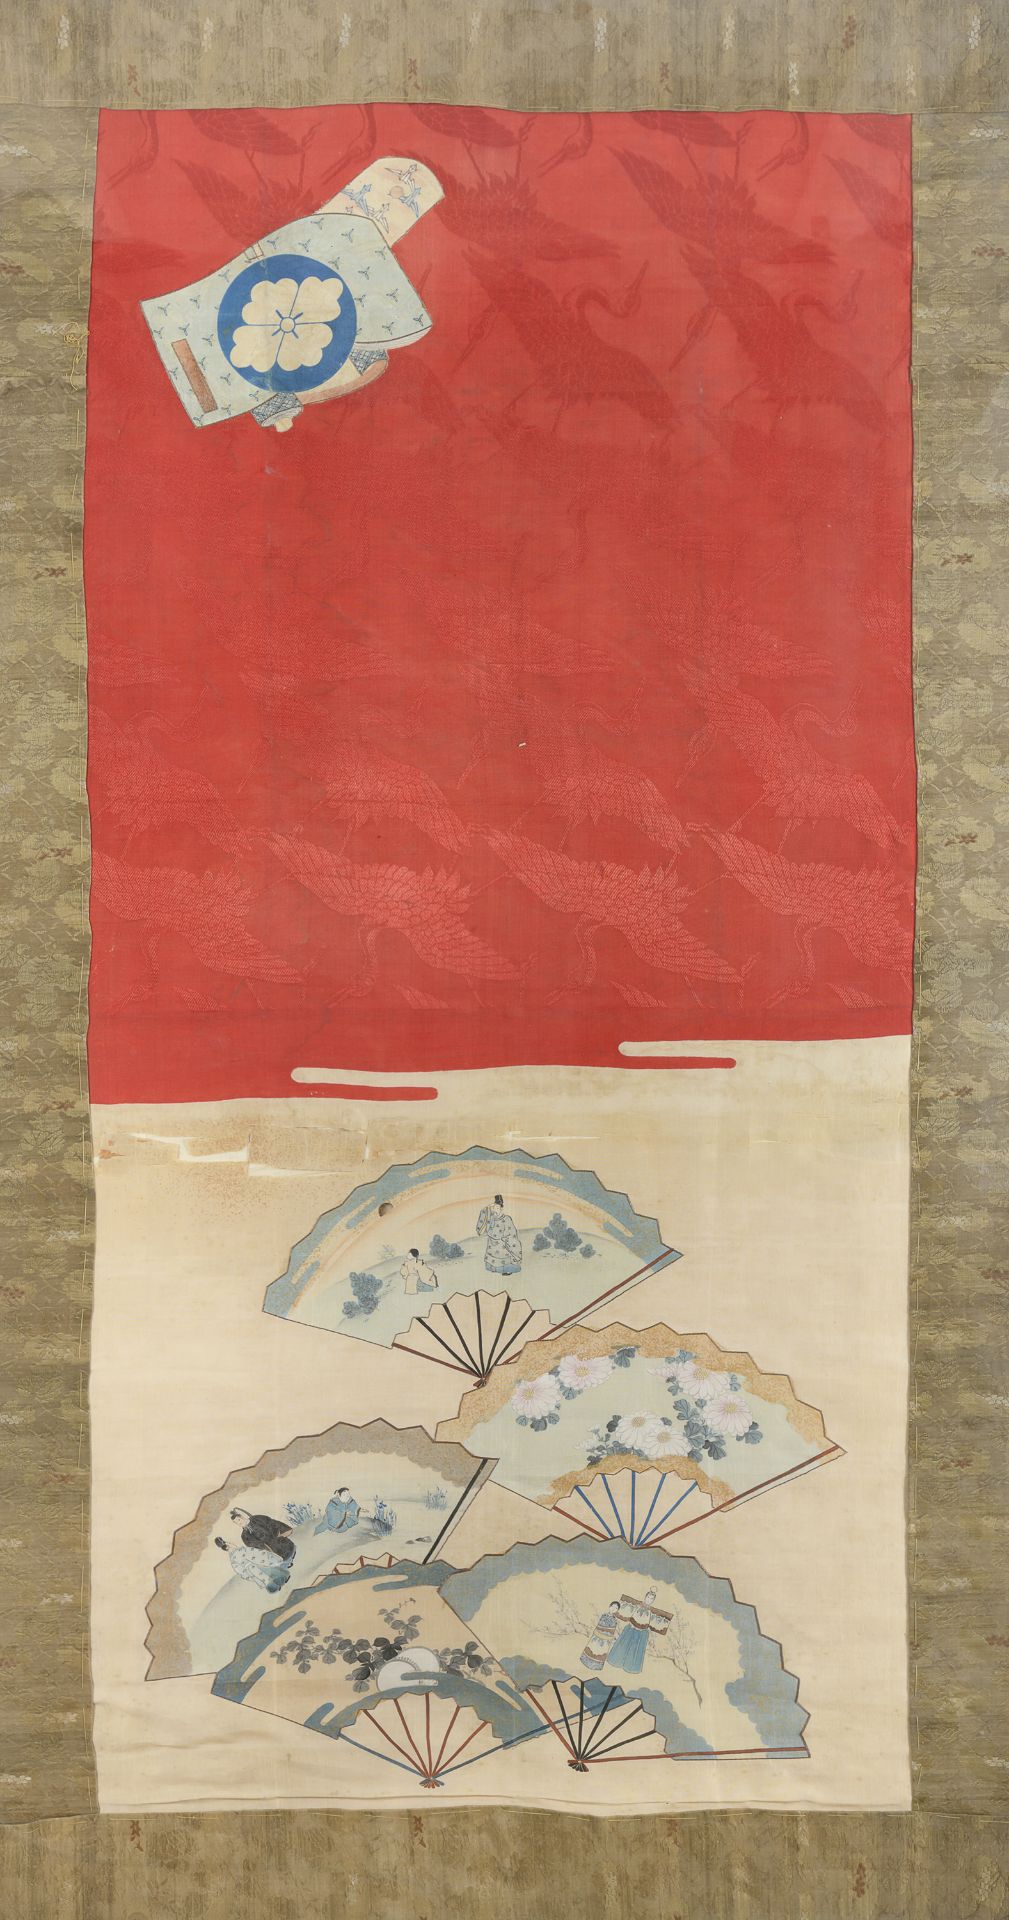 A JAPANESE MIXED MEDIA COMPOSITION 19TH CENTURY